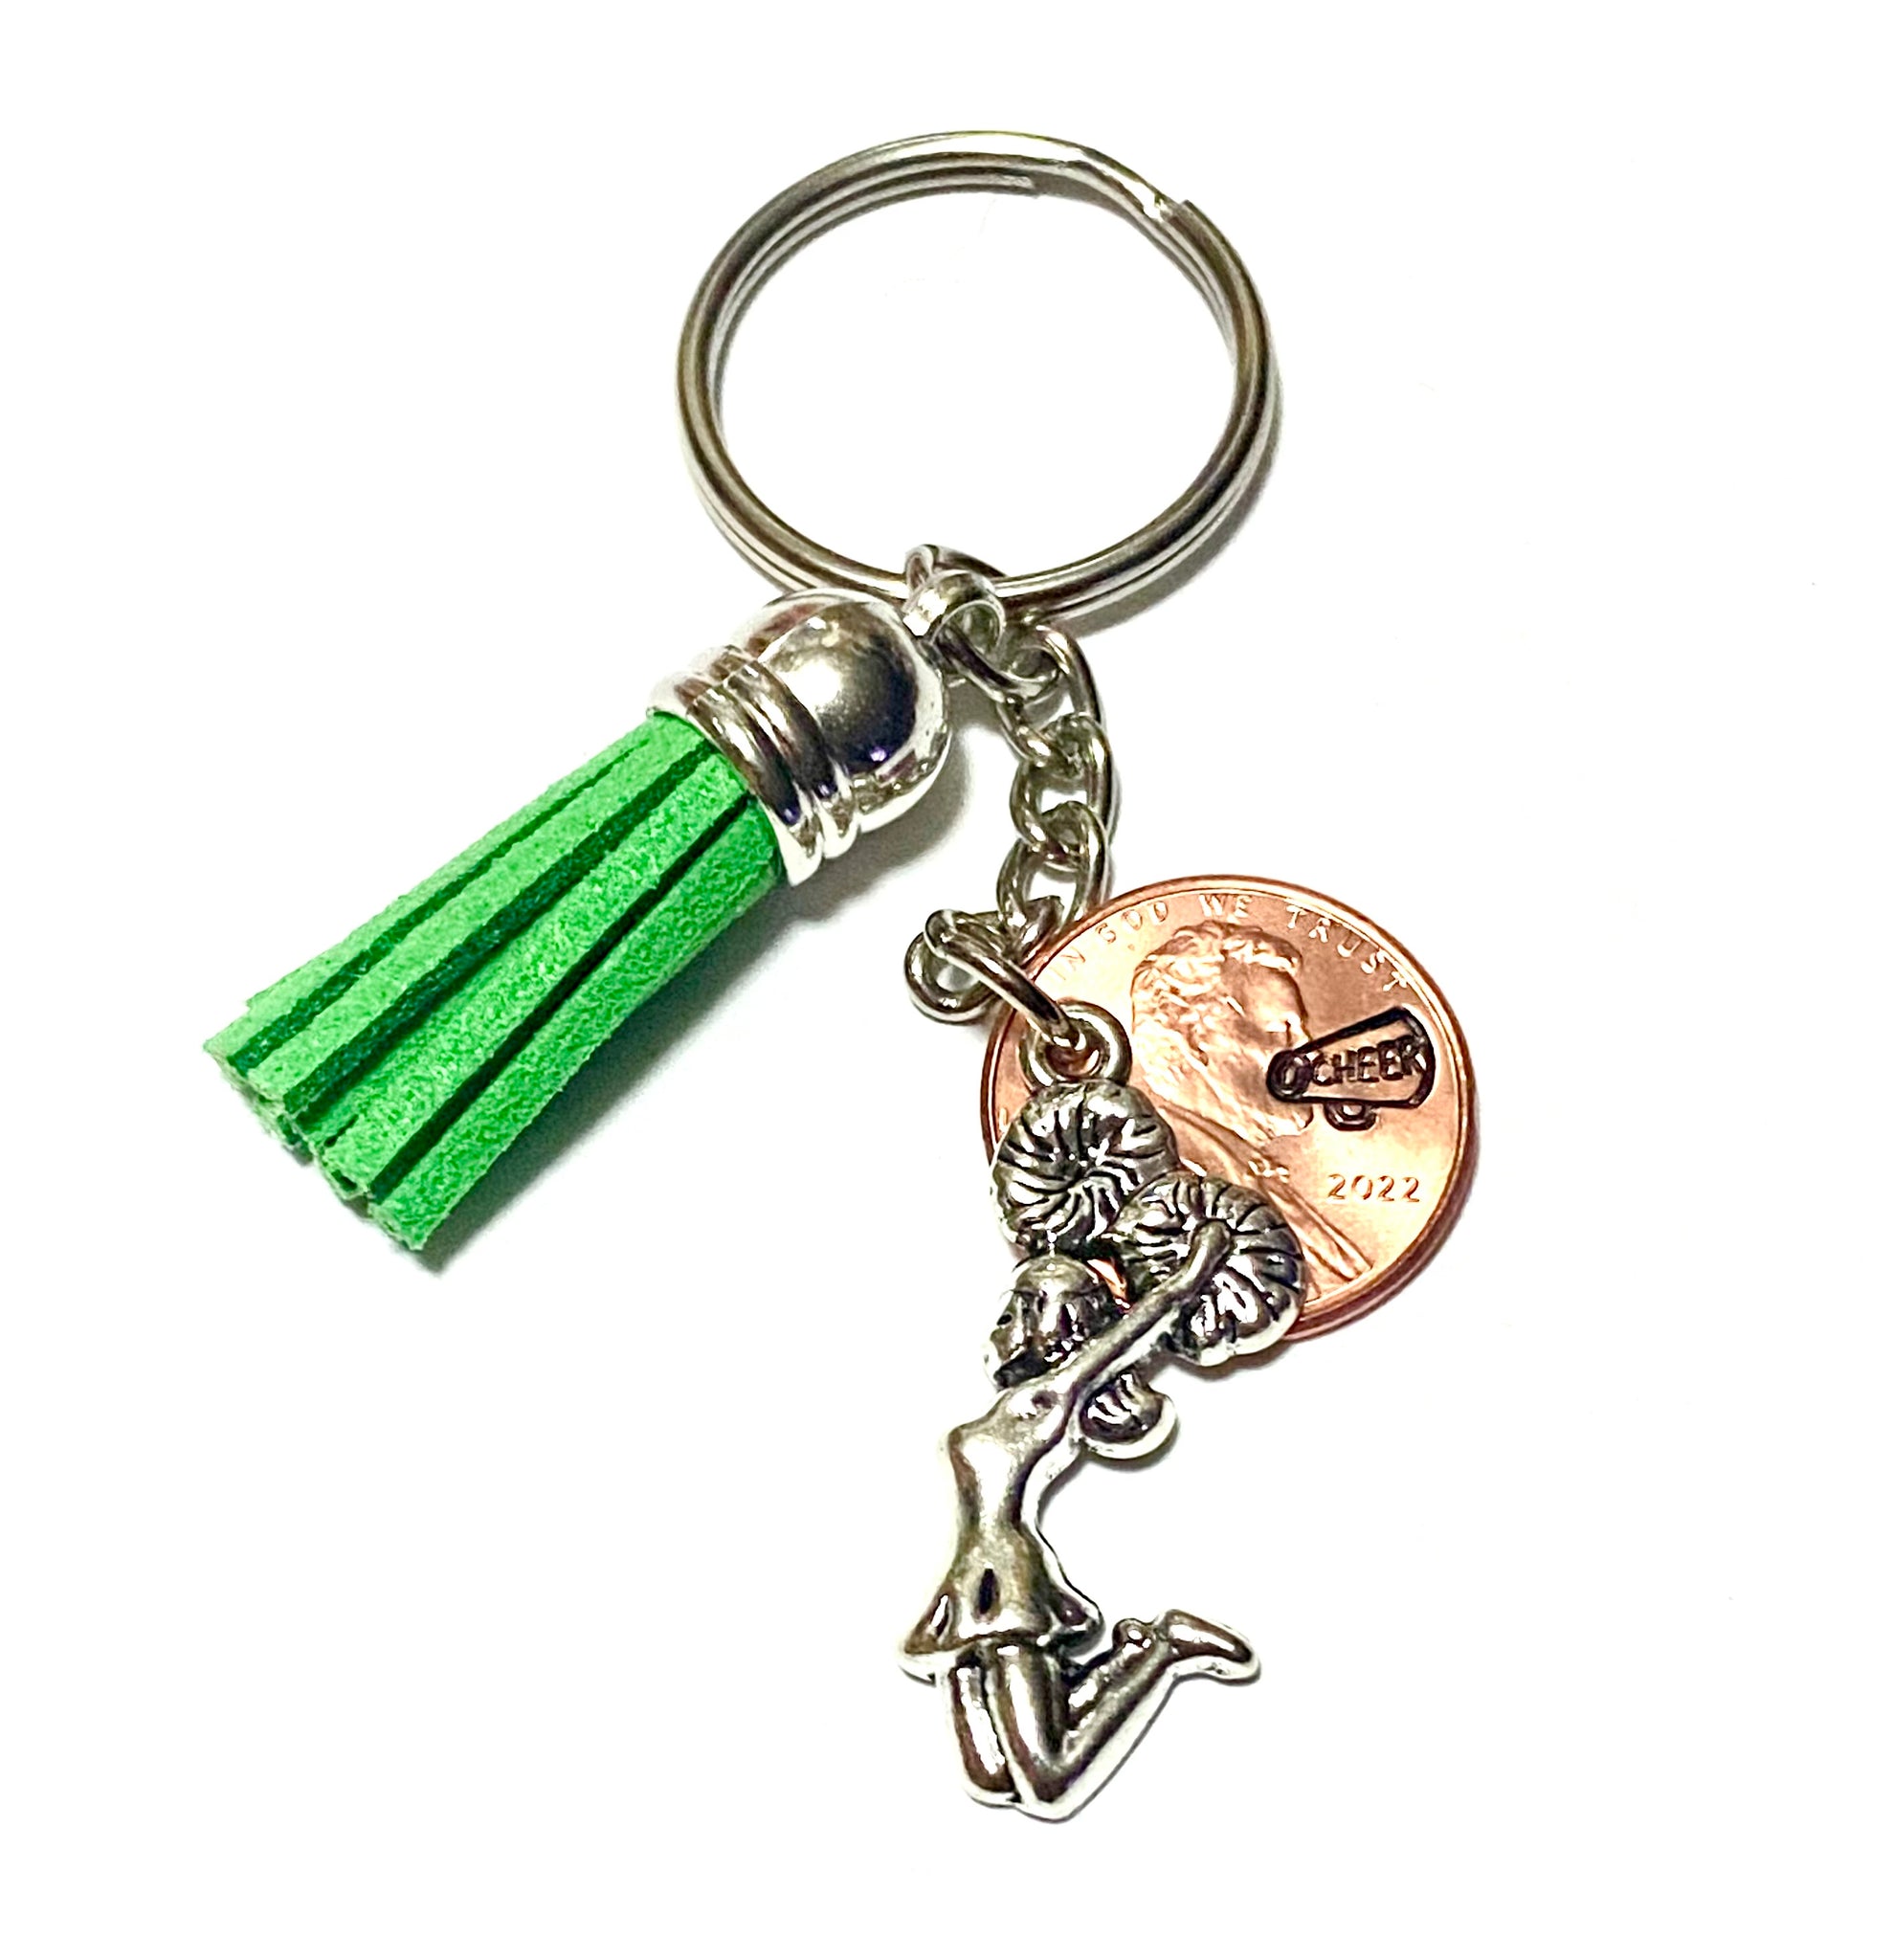 A silver charm featuring a cheerleader with pom poms attached to a lucky penny with a detailed cheer megaphone design. Also attached is a green tassel.